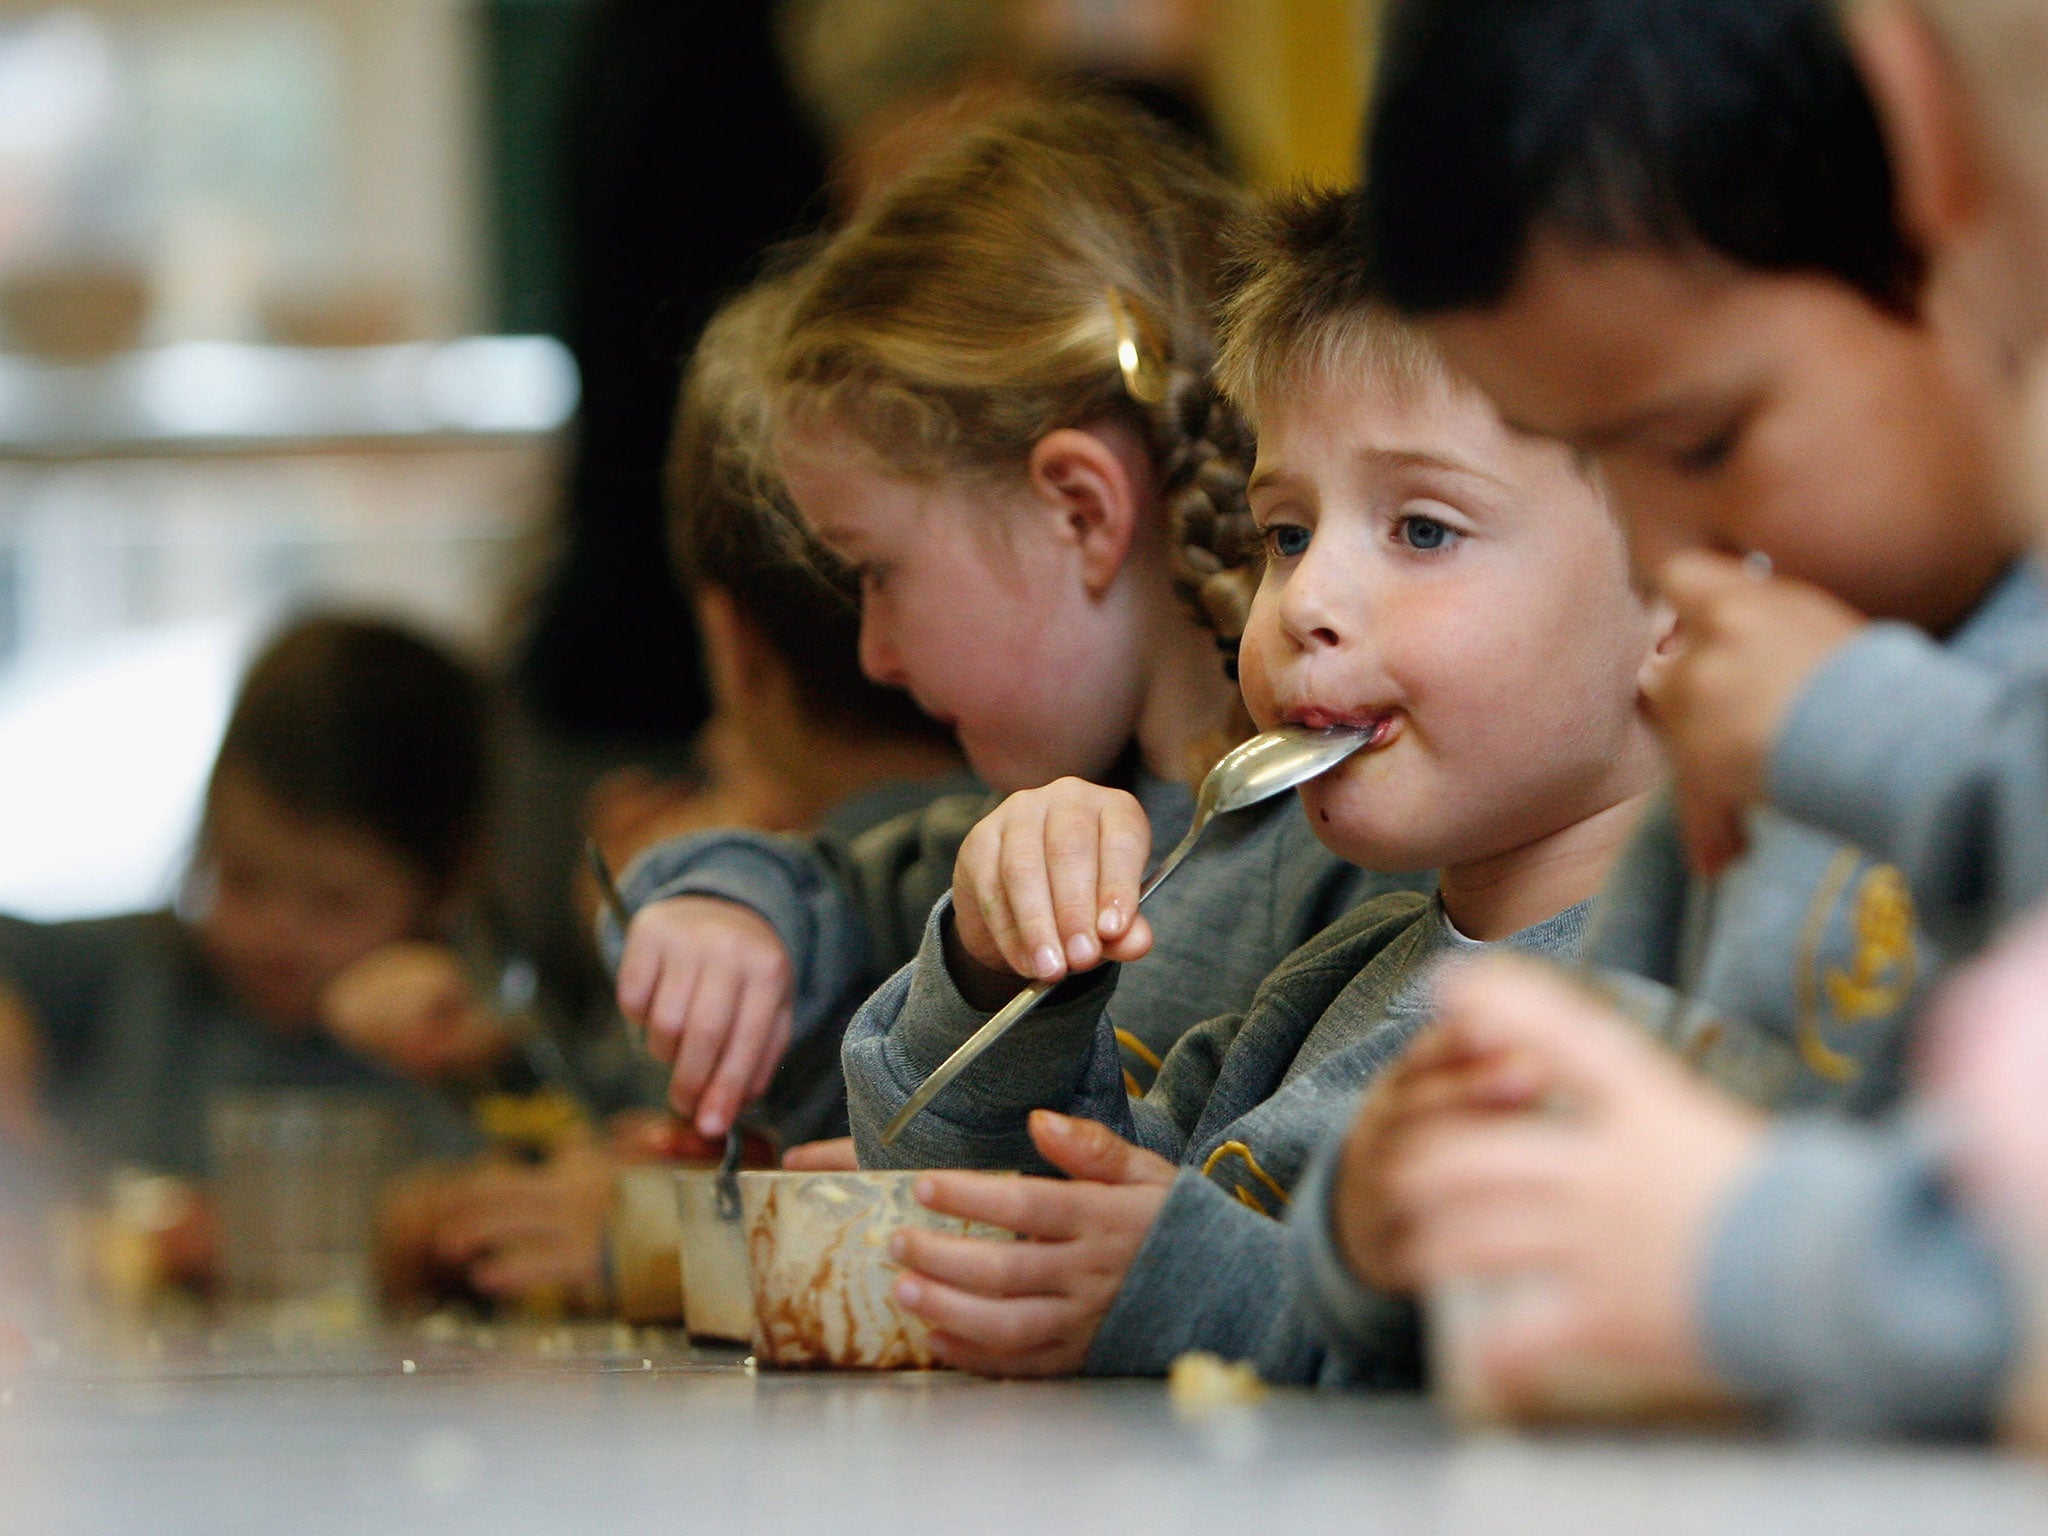 The poll found 78 per cent of 765 teachers in England and Wales reported children coming to school hungry at least once a week